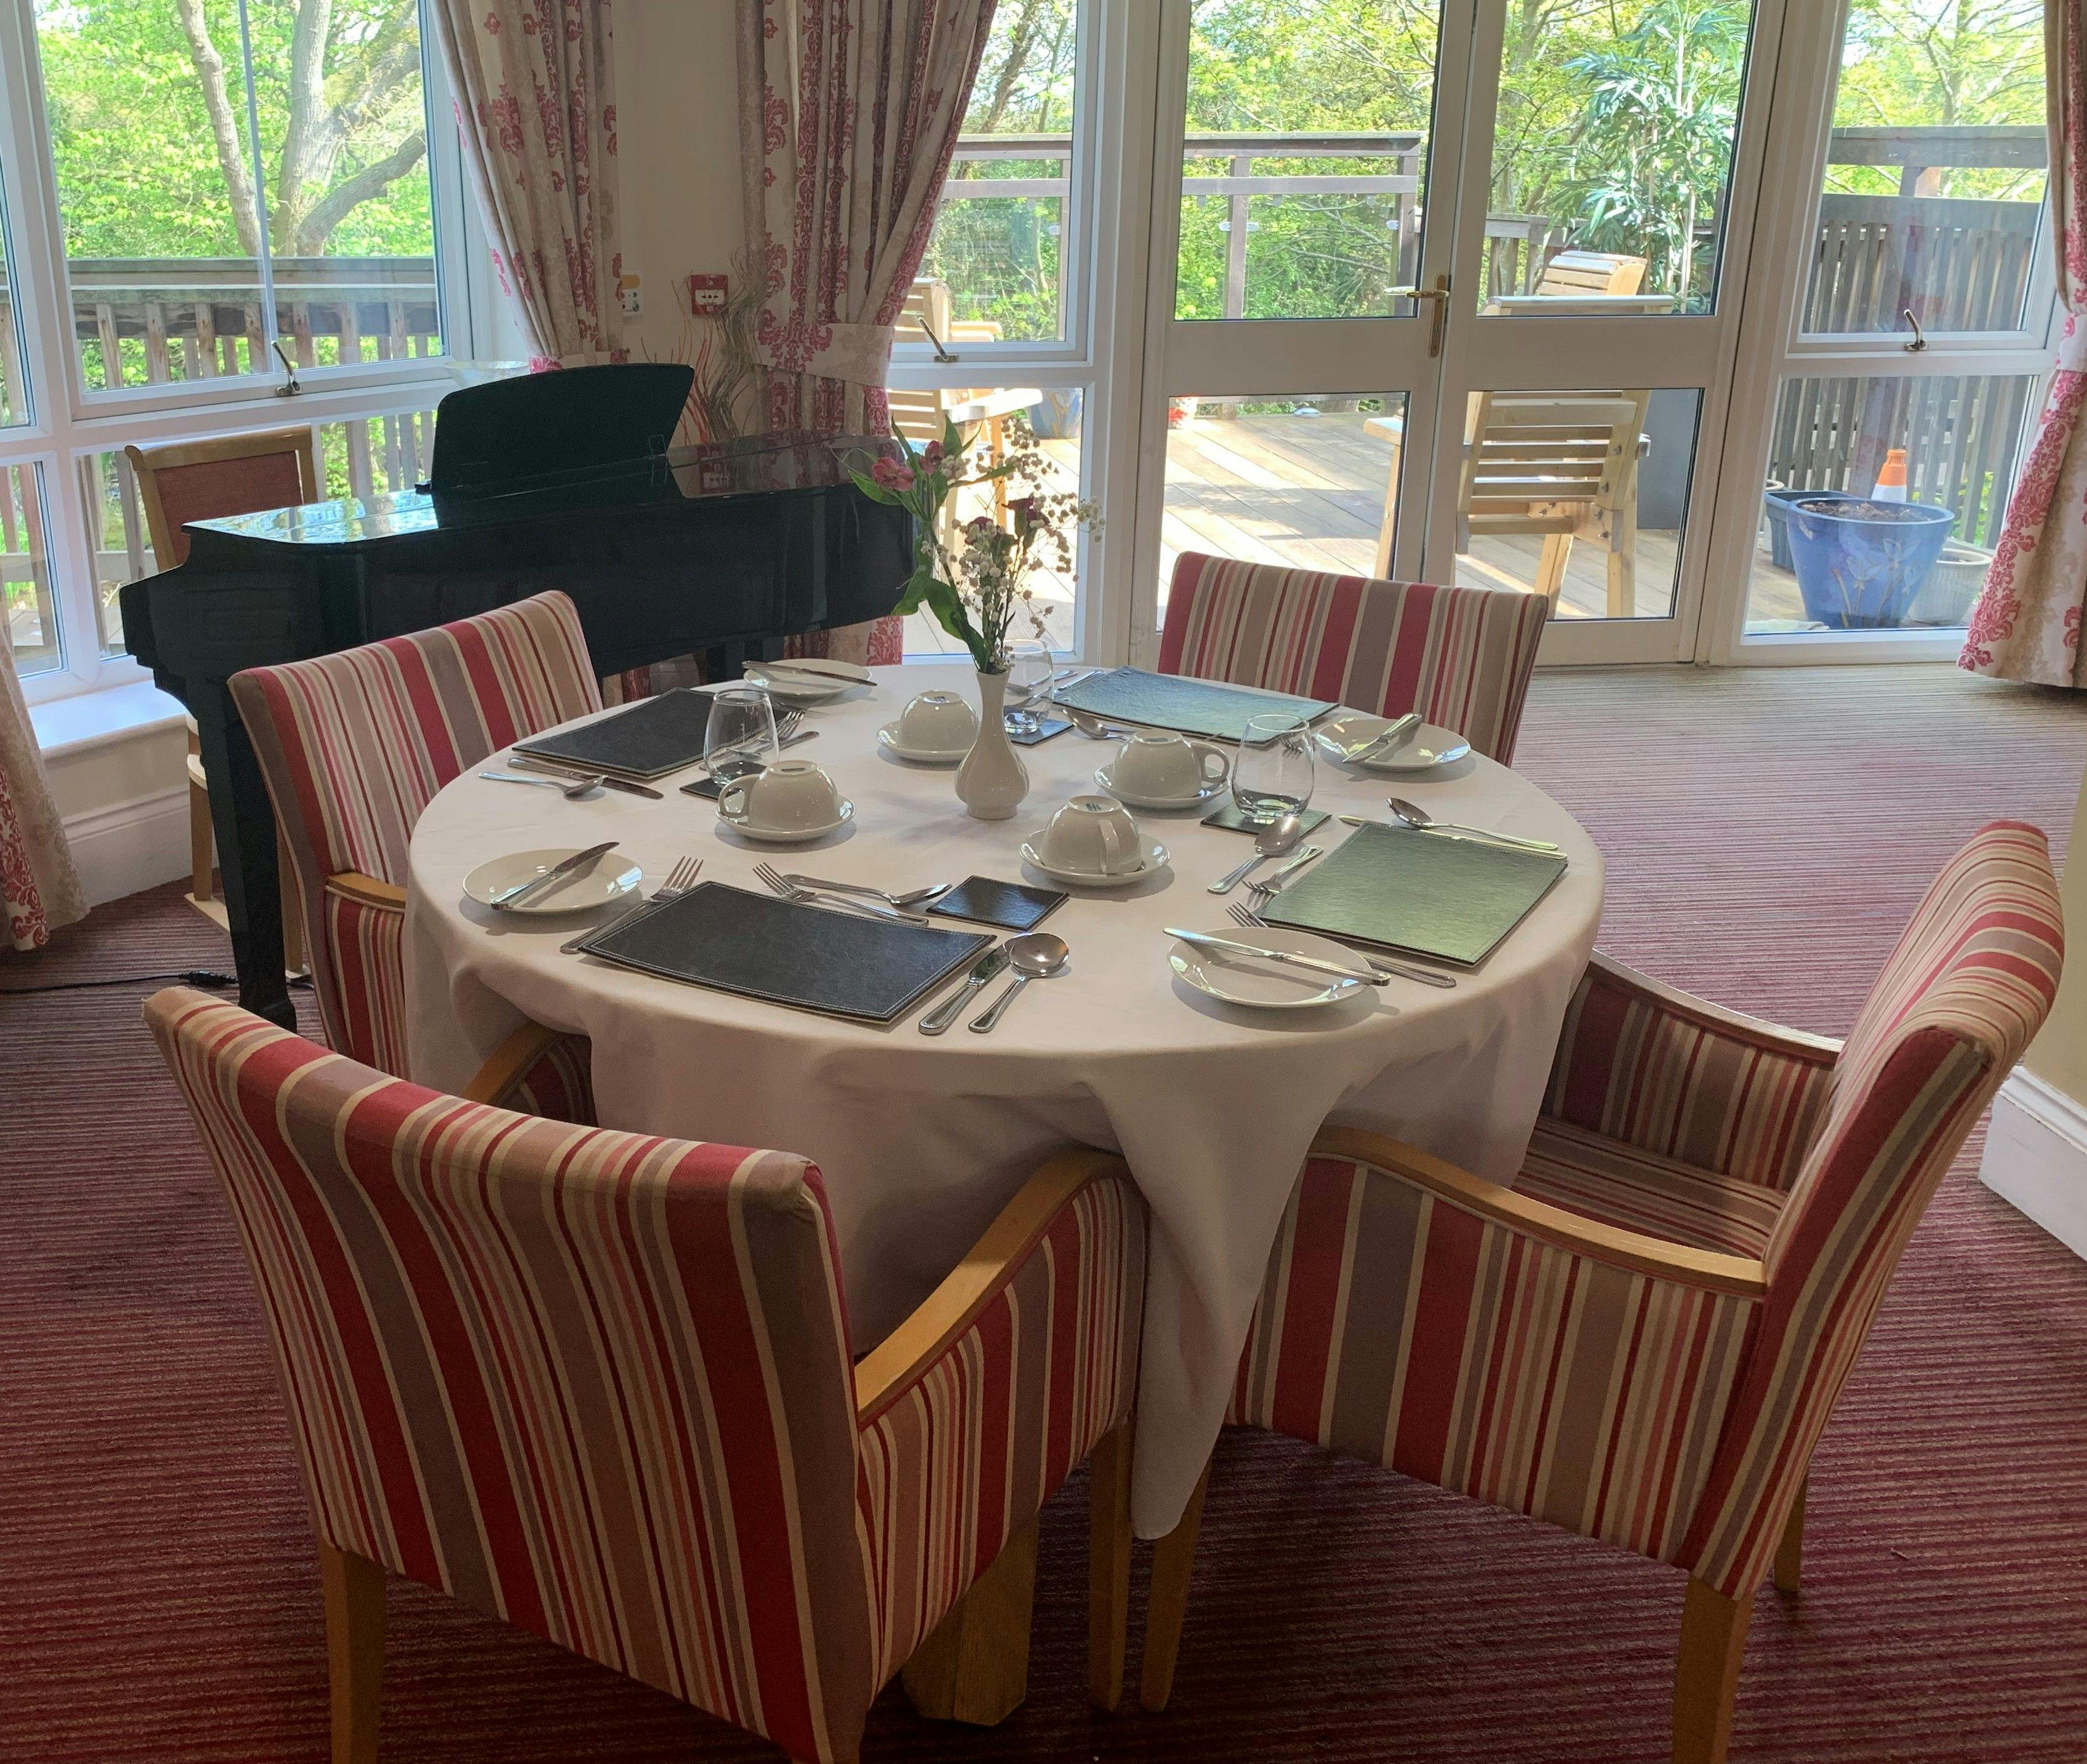 Dining area of Cooperscroft care home in Potters Bar, Hertfordshire